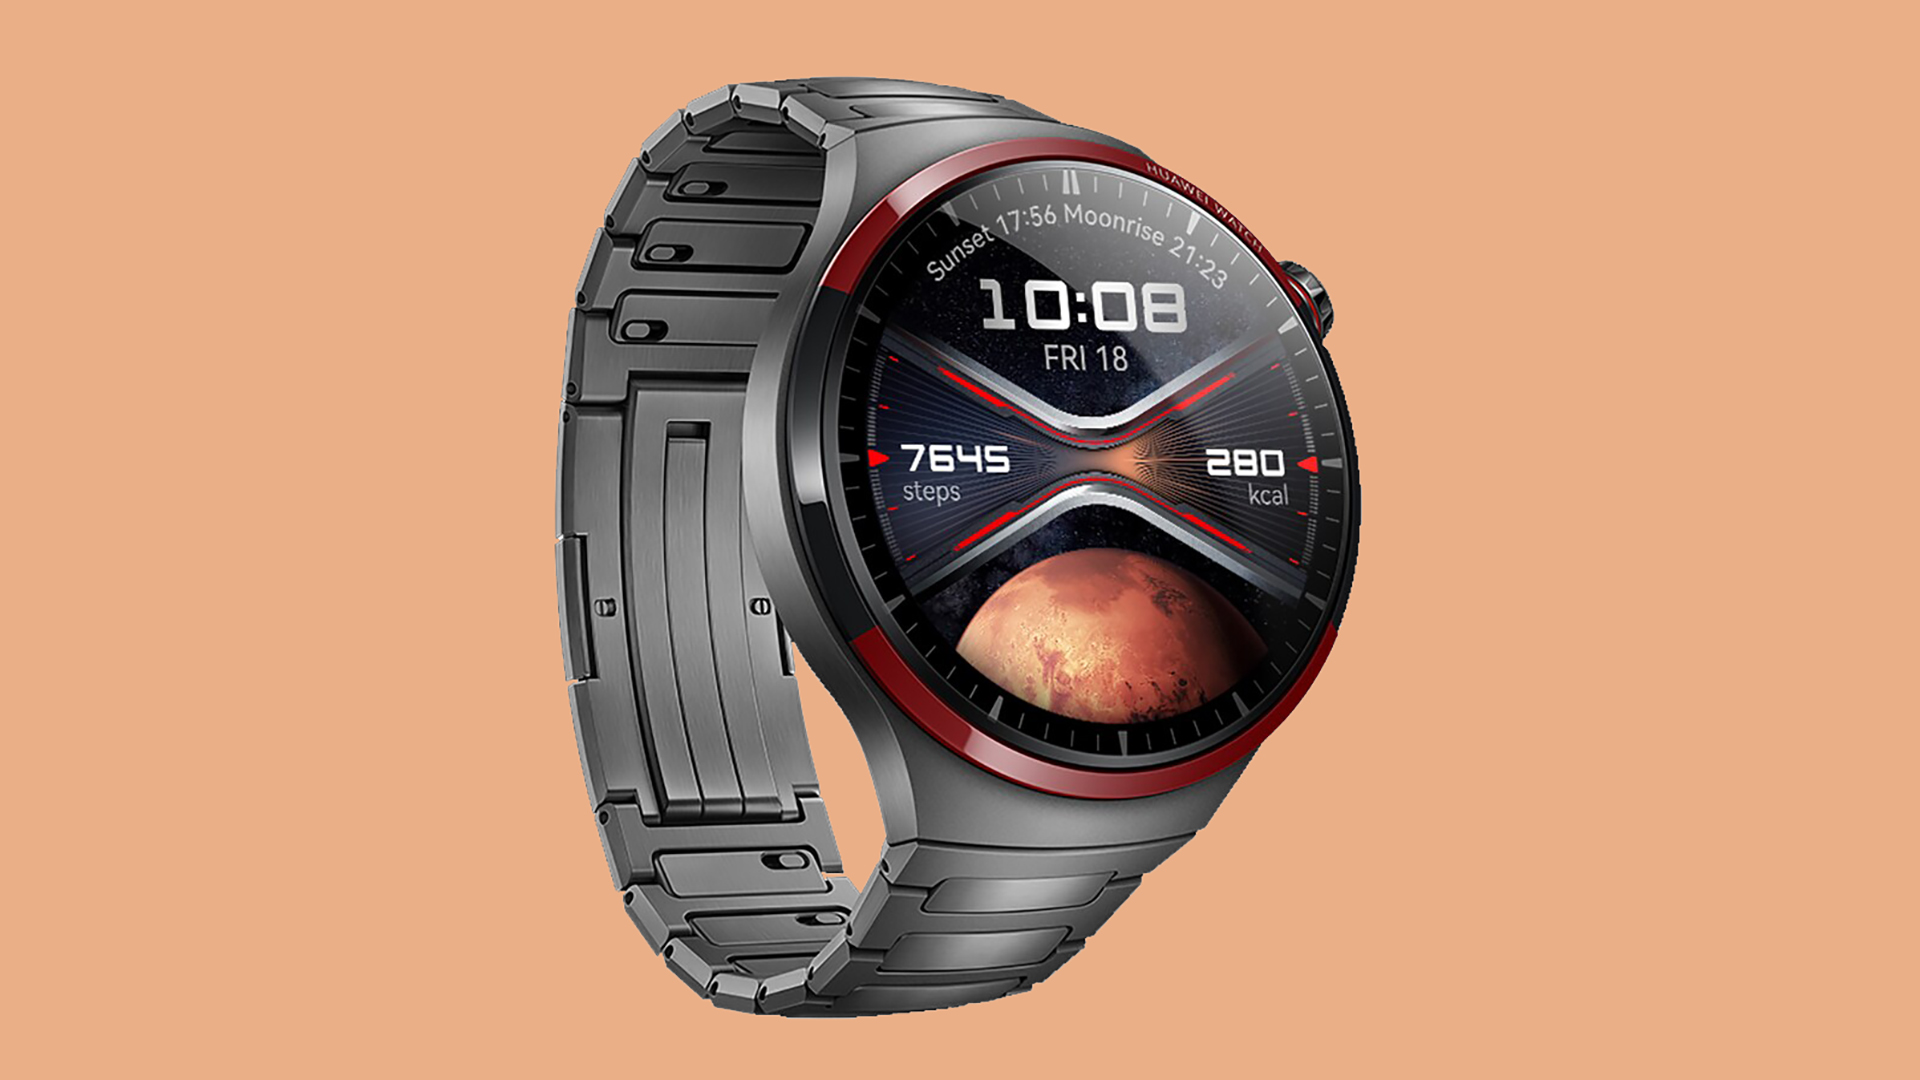 This space exploration-themed smartwatch is coming to more countries